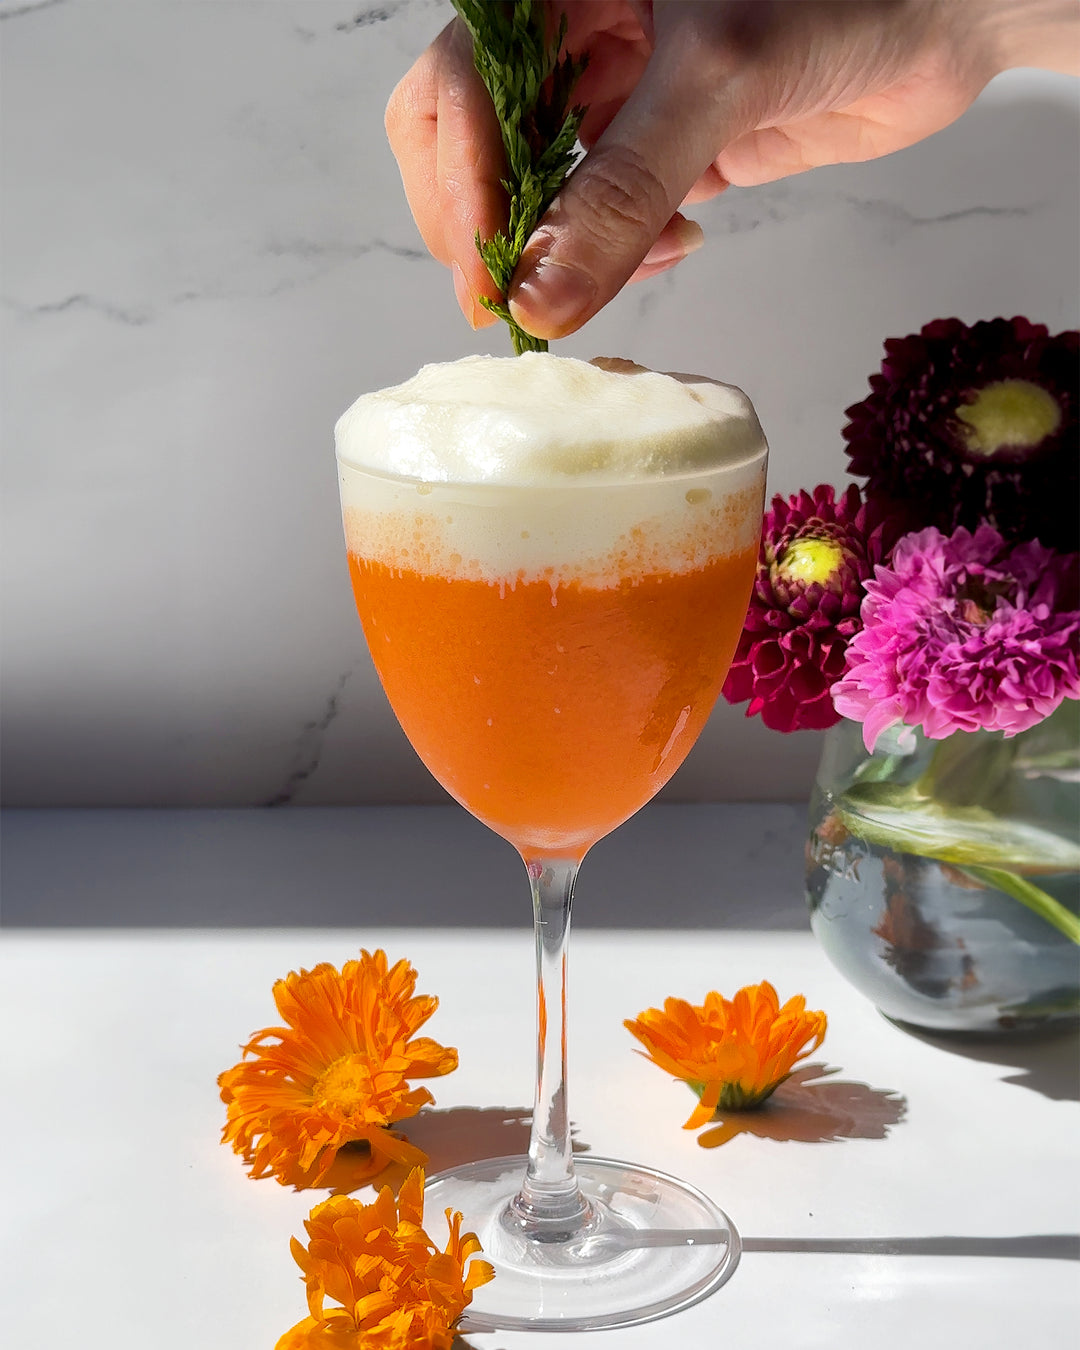 A hand garnishing The Carrot Cake cocktail, a bright orange drink in a Nick and Norah glass topped with white fluffy cream cheese foam.